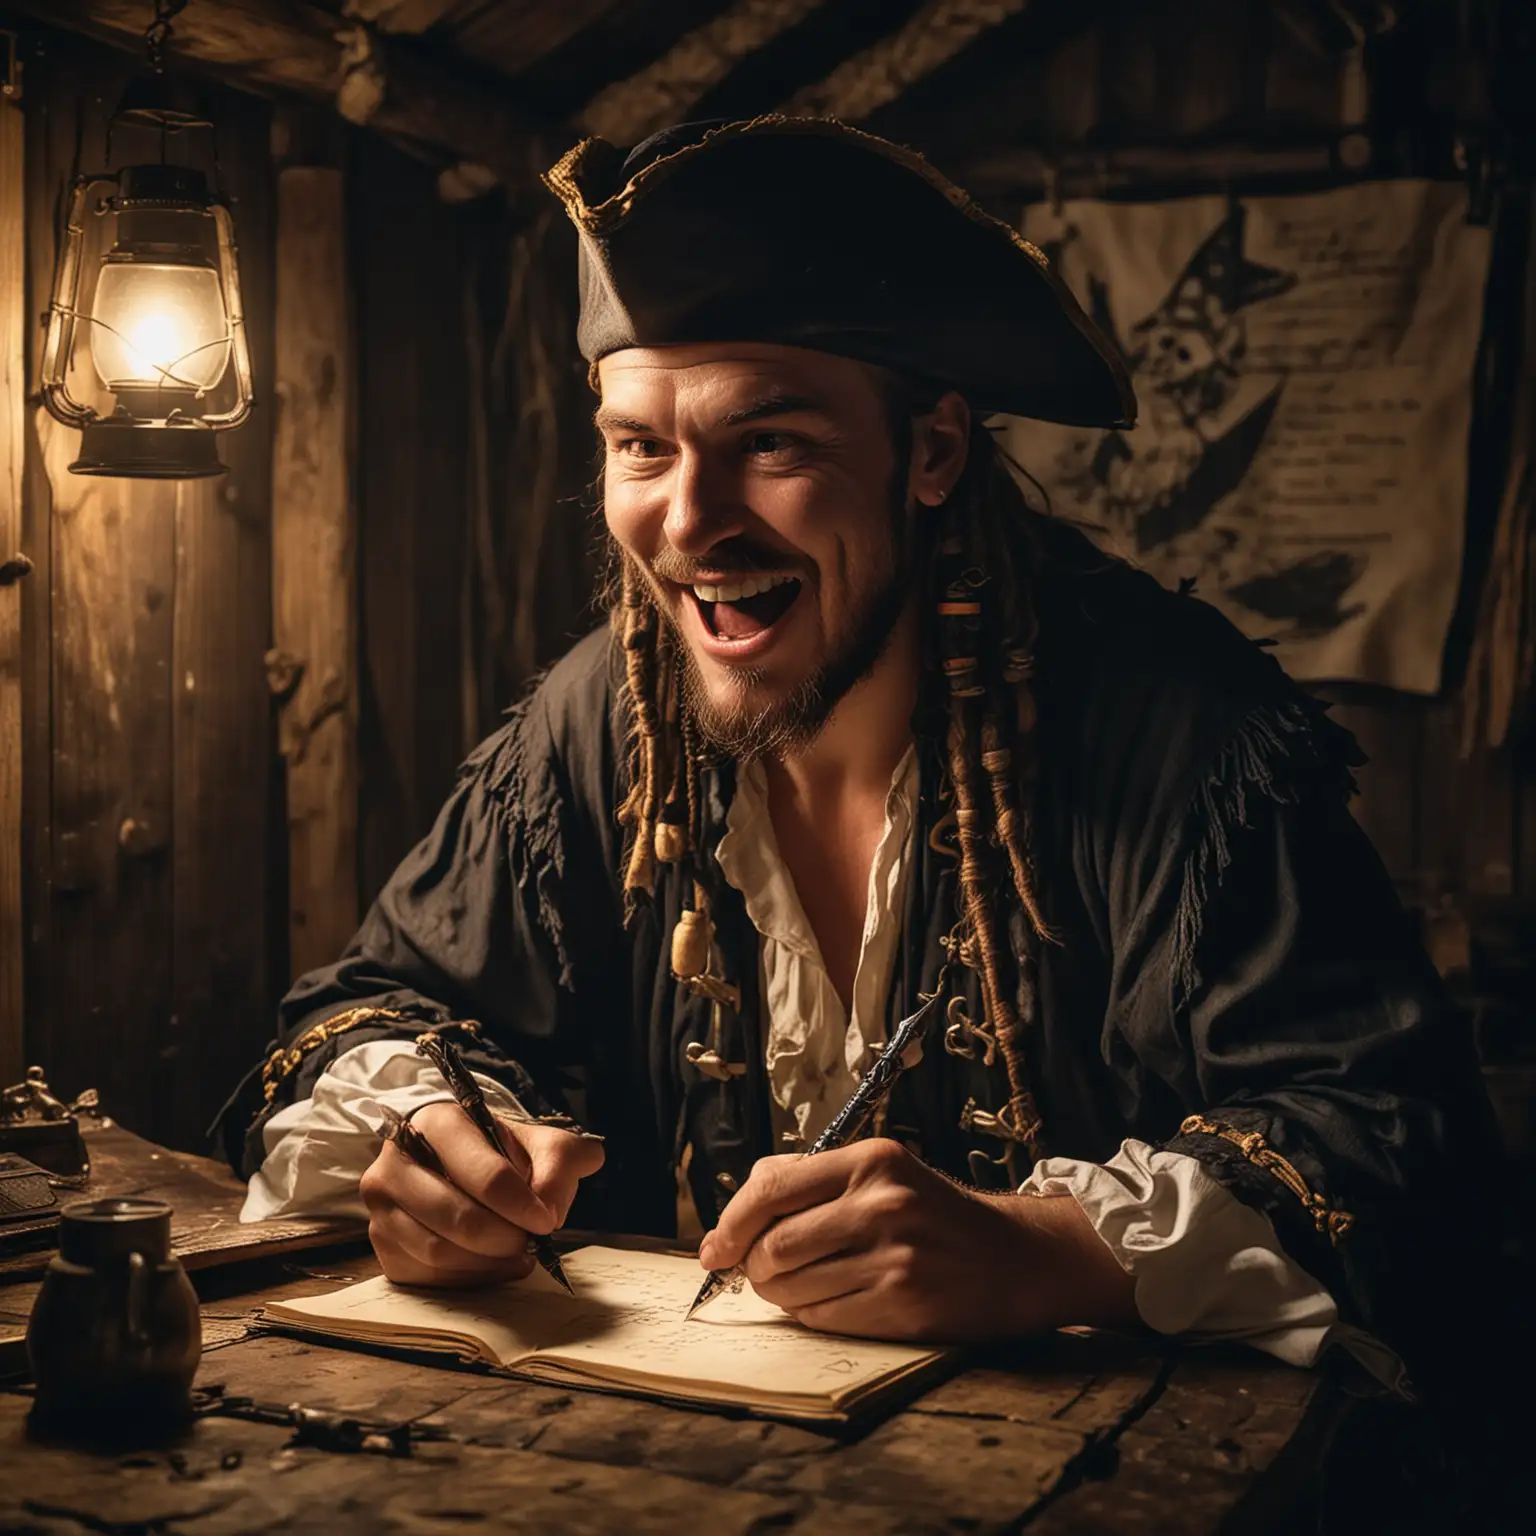 Laughing Pirate Writing in Cabin with Lantern